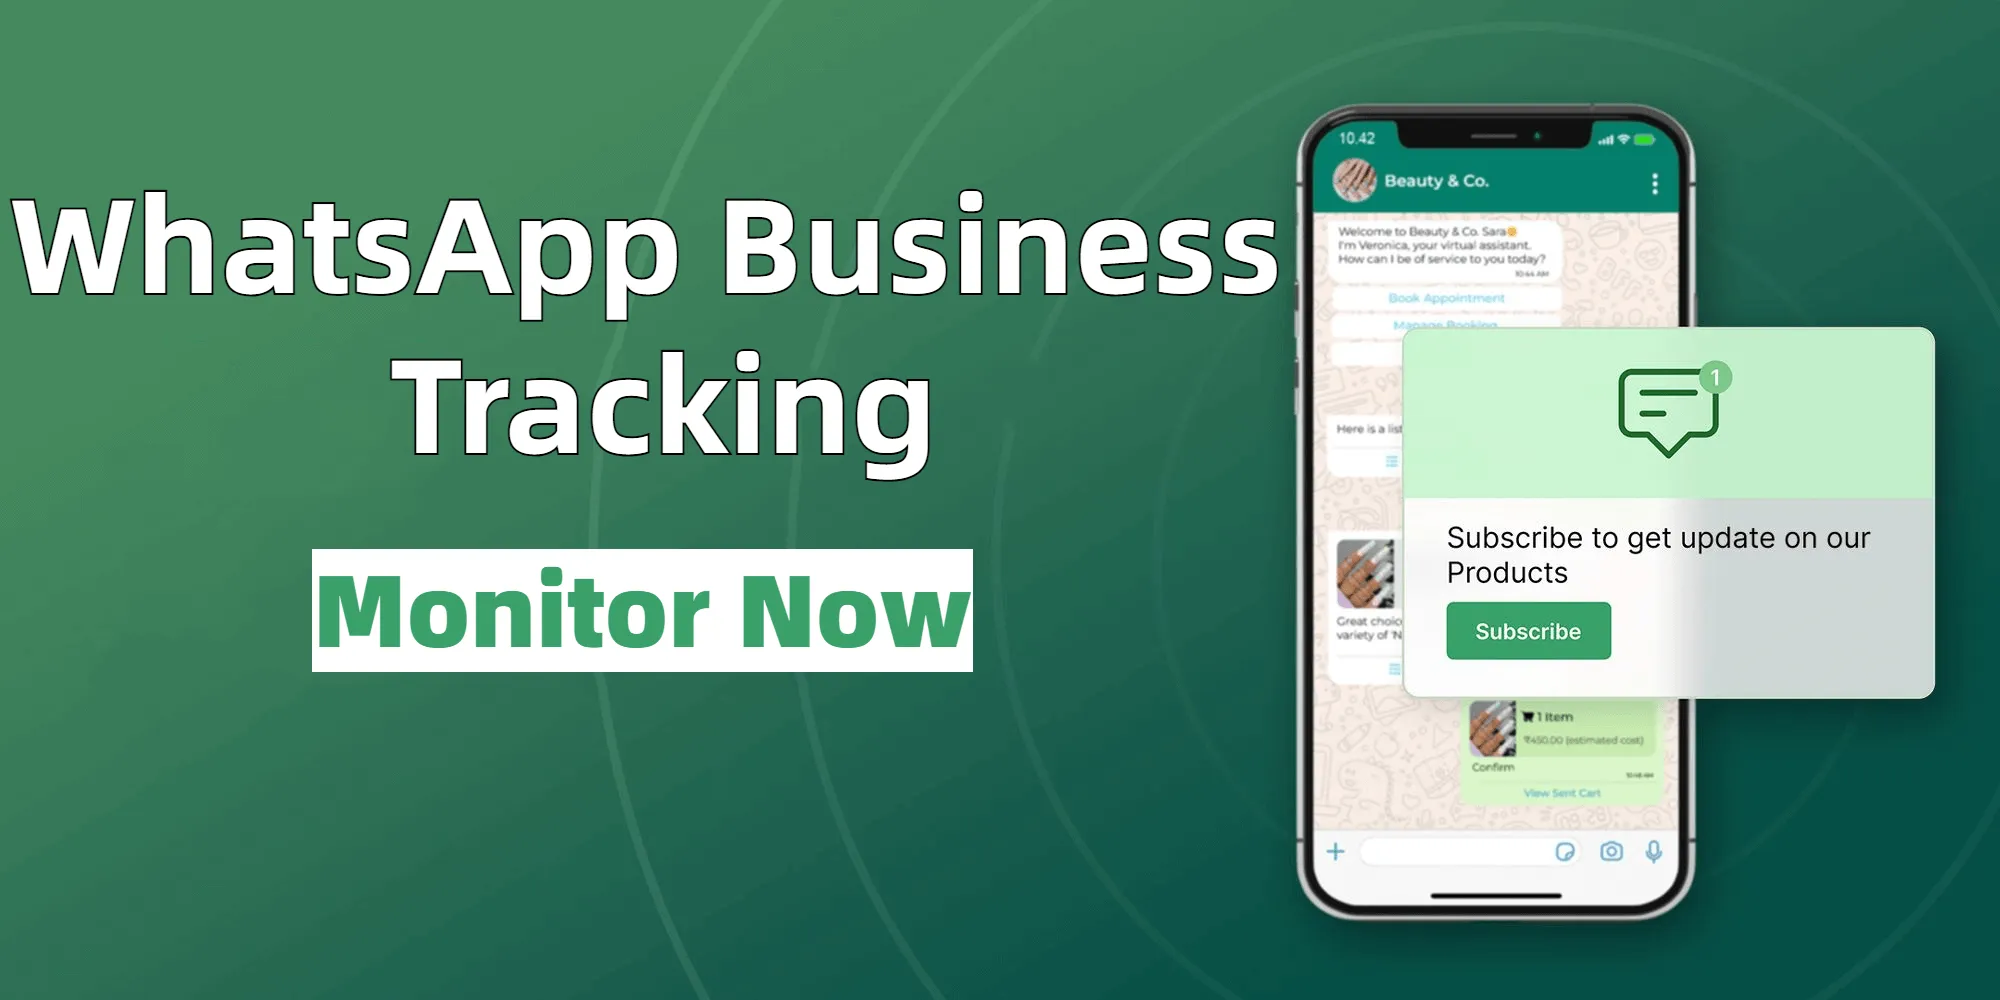 How to Tracking Someone's WhatsApp Business Messages?